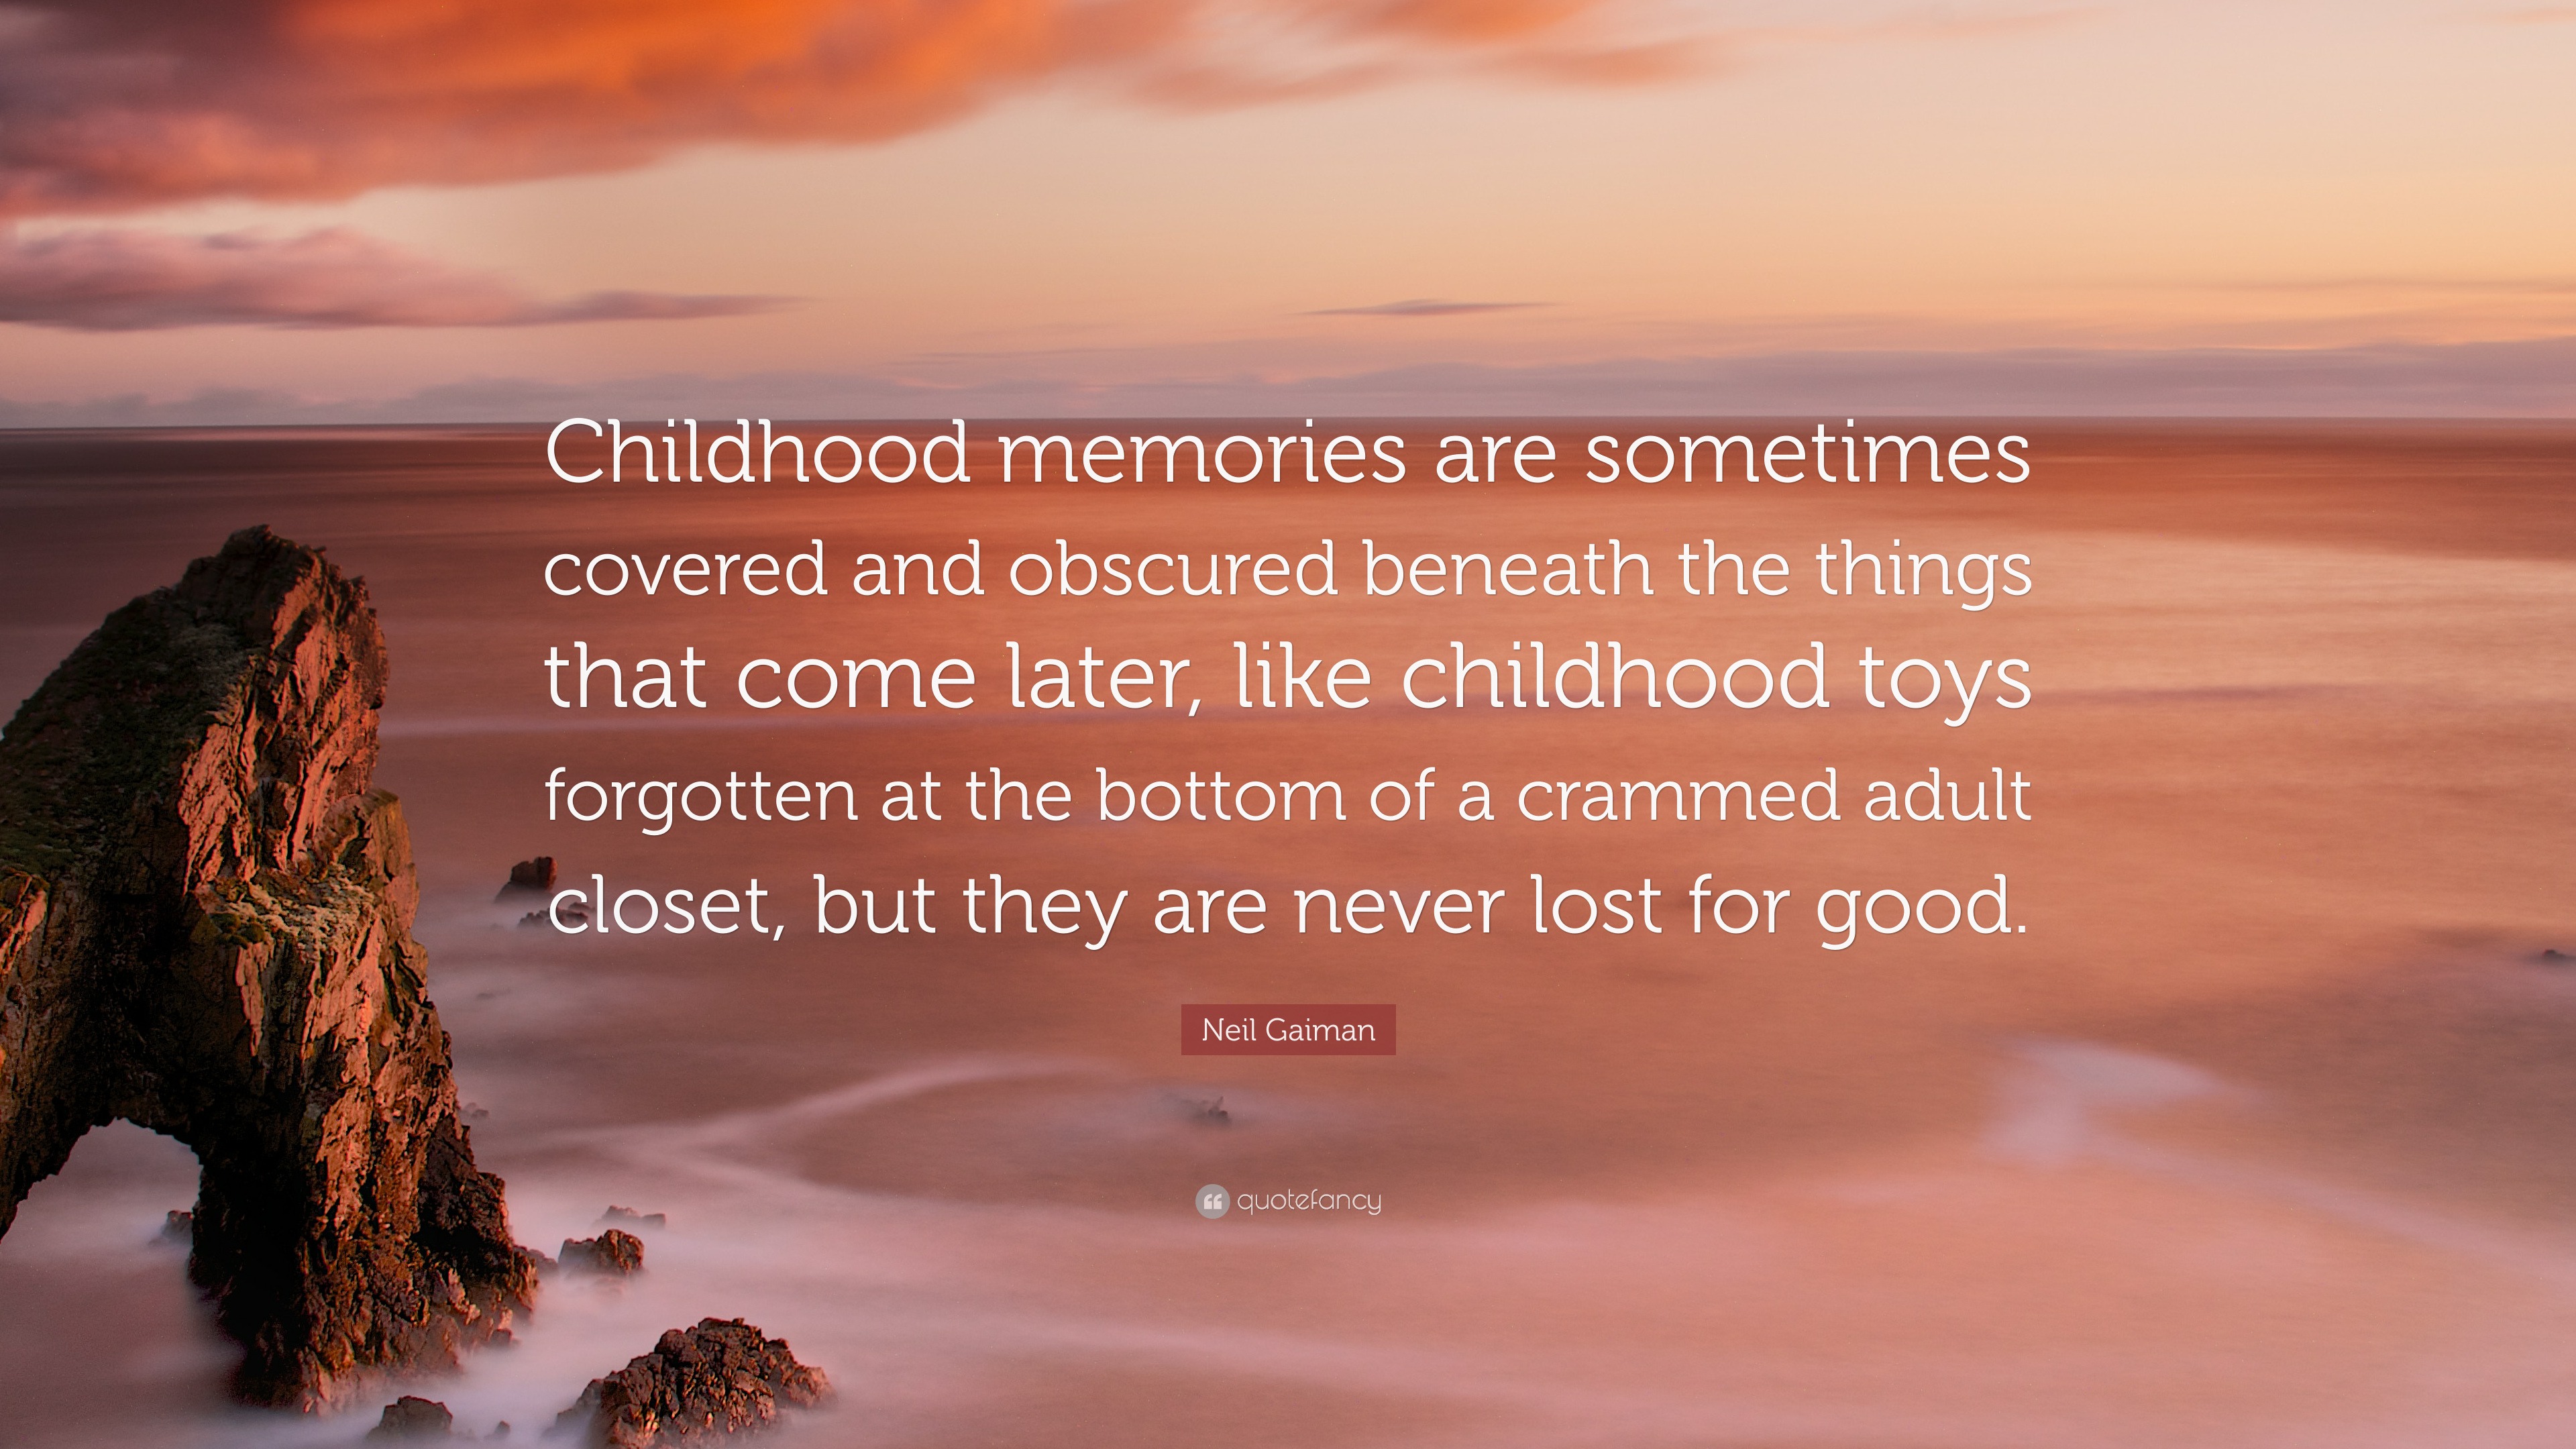 Neil Gaiman Quote: “Childhood memories are sometimes covered and